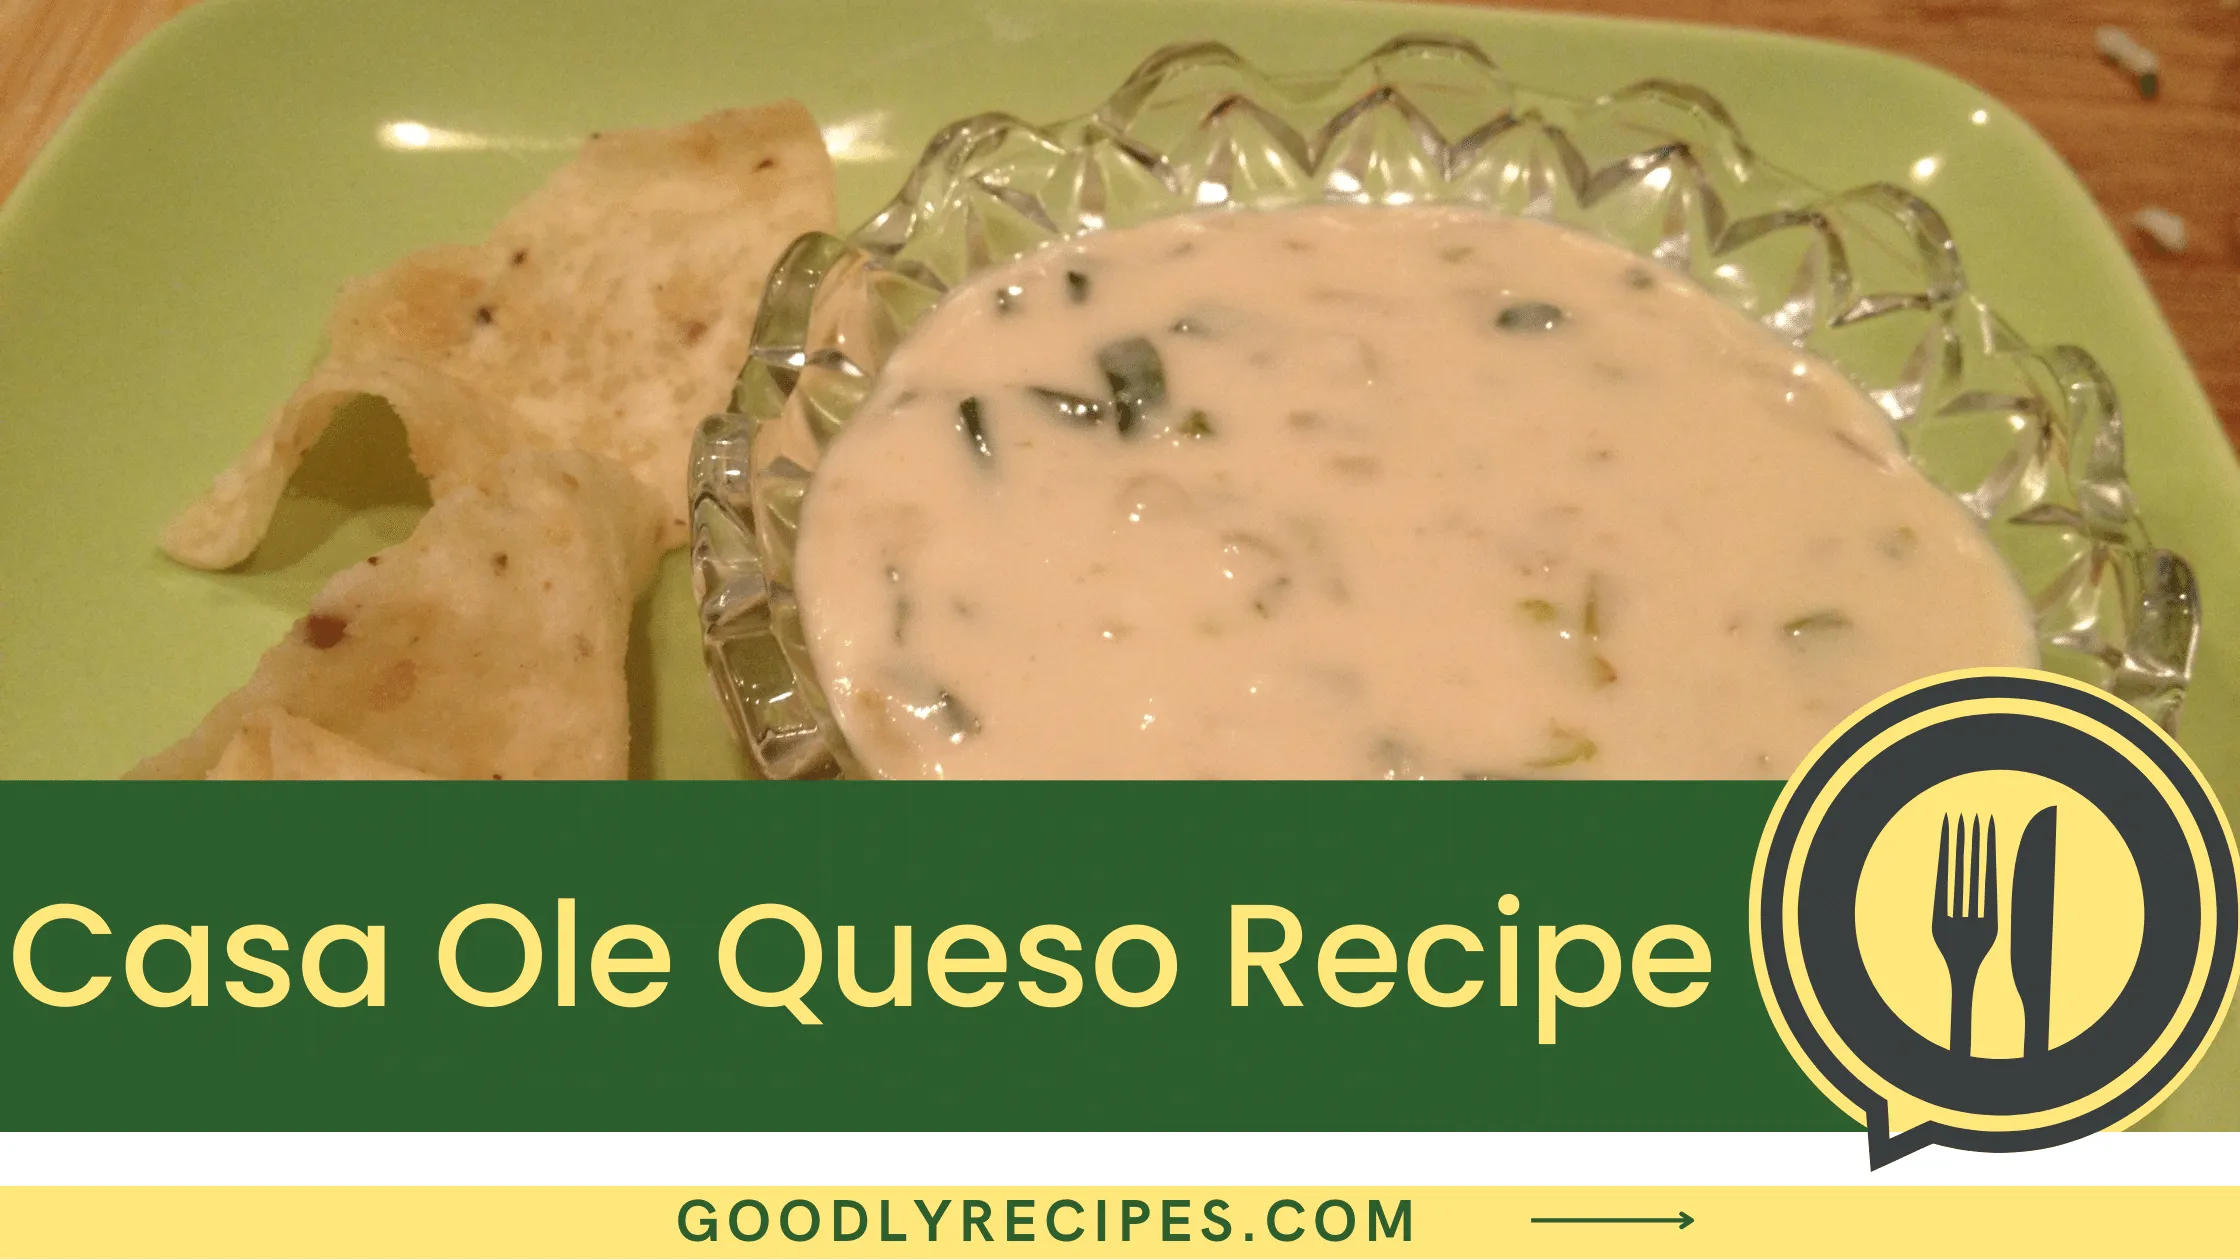 What is Casa Ole Queso?